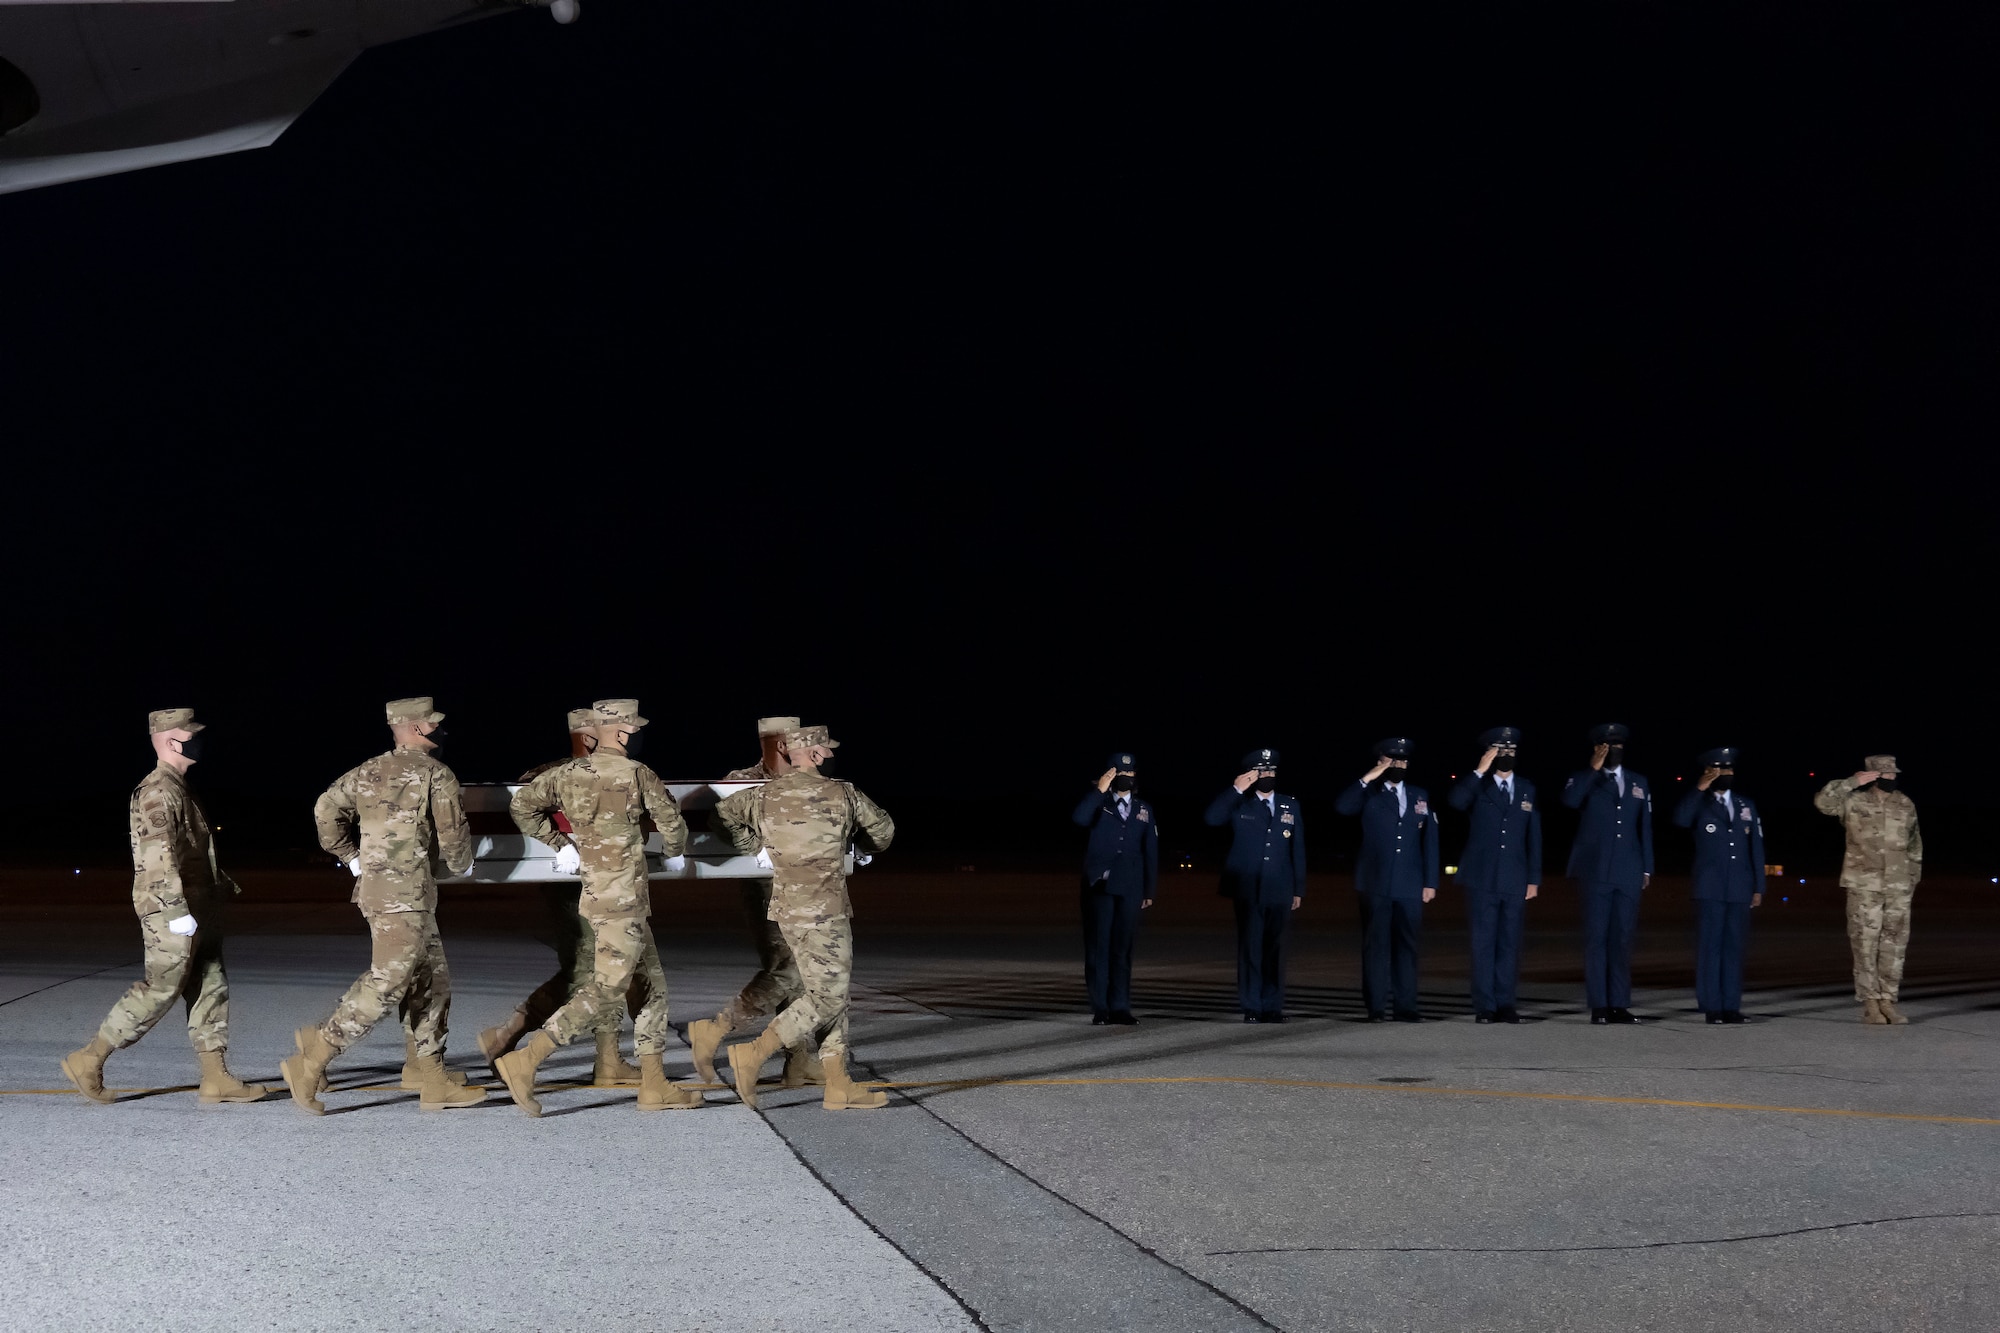 A U.S. Air Force carry team transfers the remains of Air Force Chief Master Sgt. Tresse Z. King of Raeford, North Carolina, August 6, 2021 at Dover Air Force Base, Delaware. King was assigned to the 96th Force Support Squadron, Eglin Air Force Base, Florida. (U.S. Air Force photo by Jason Minto)